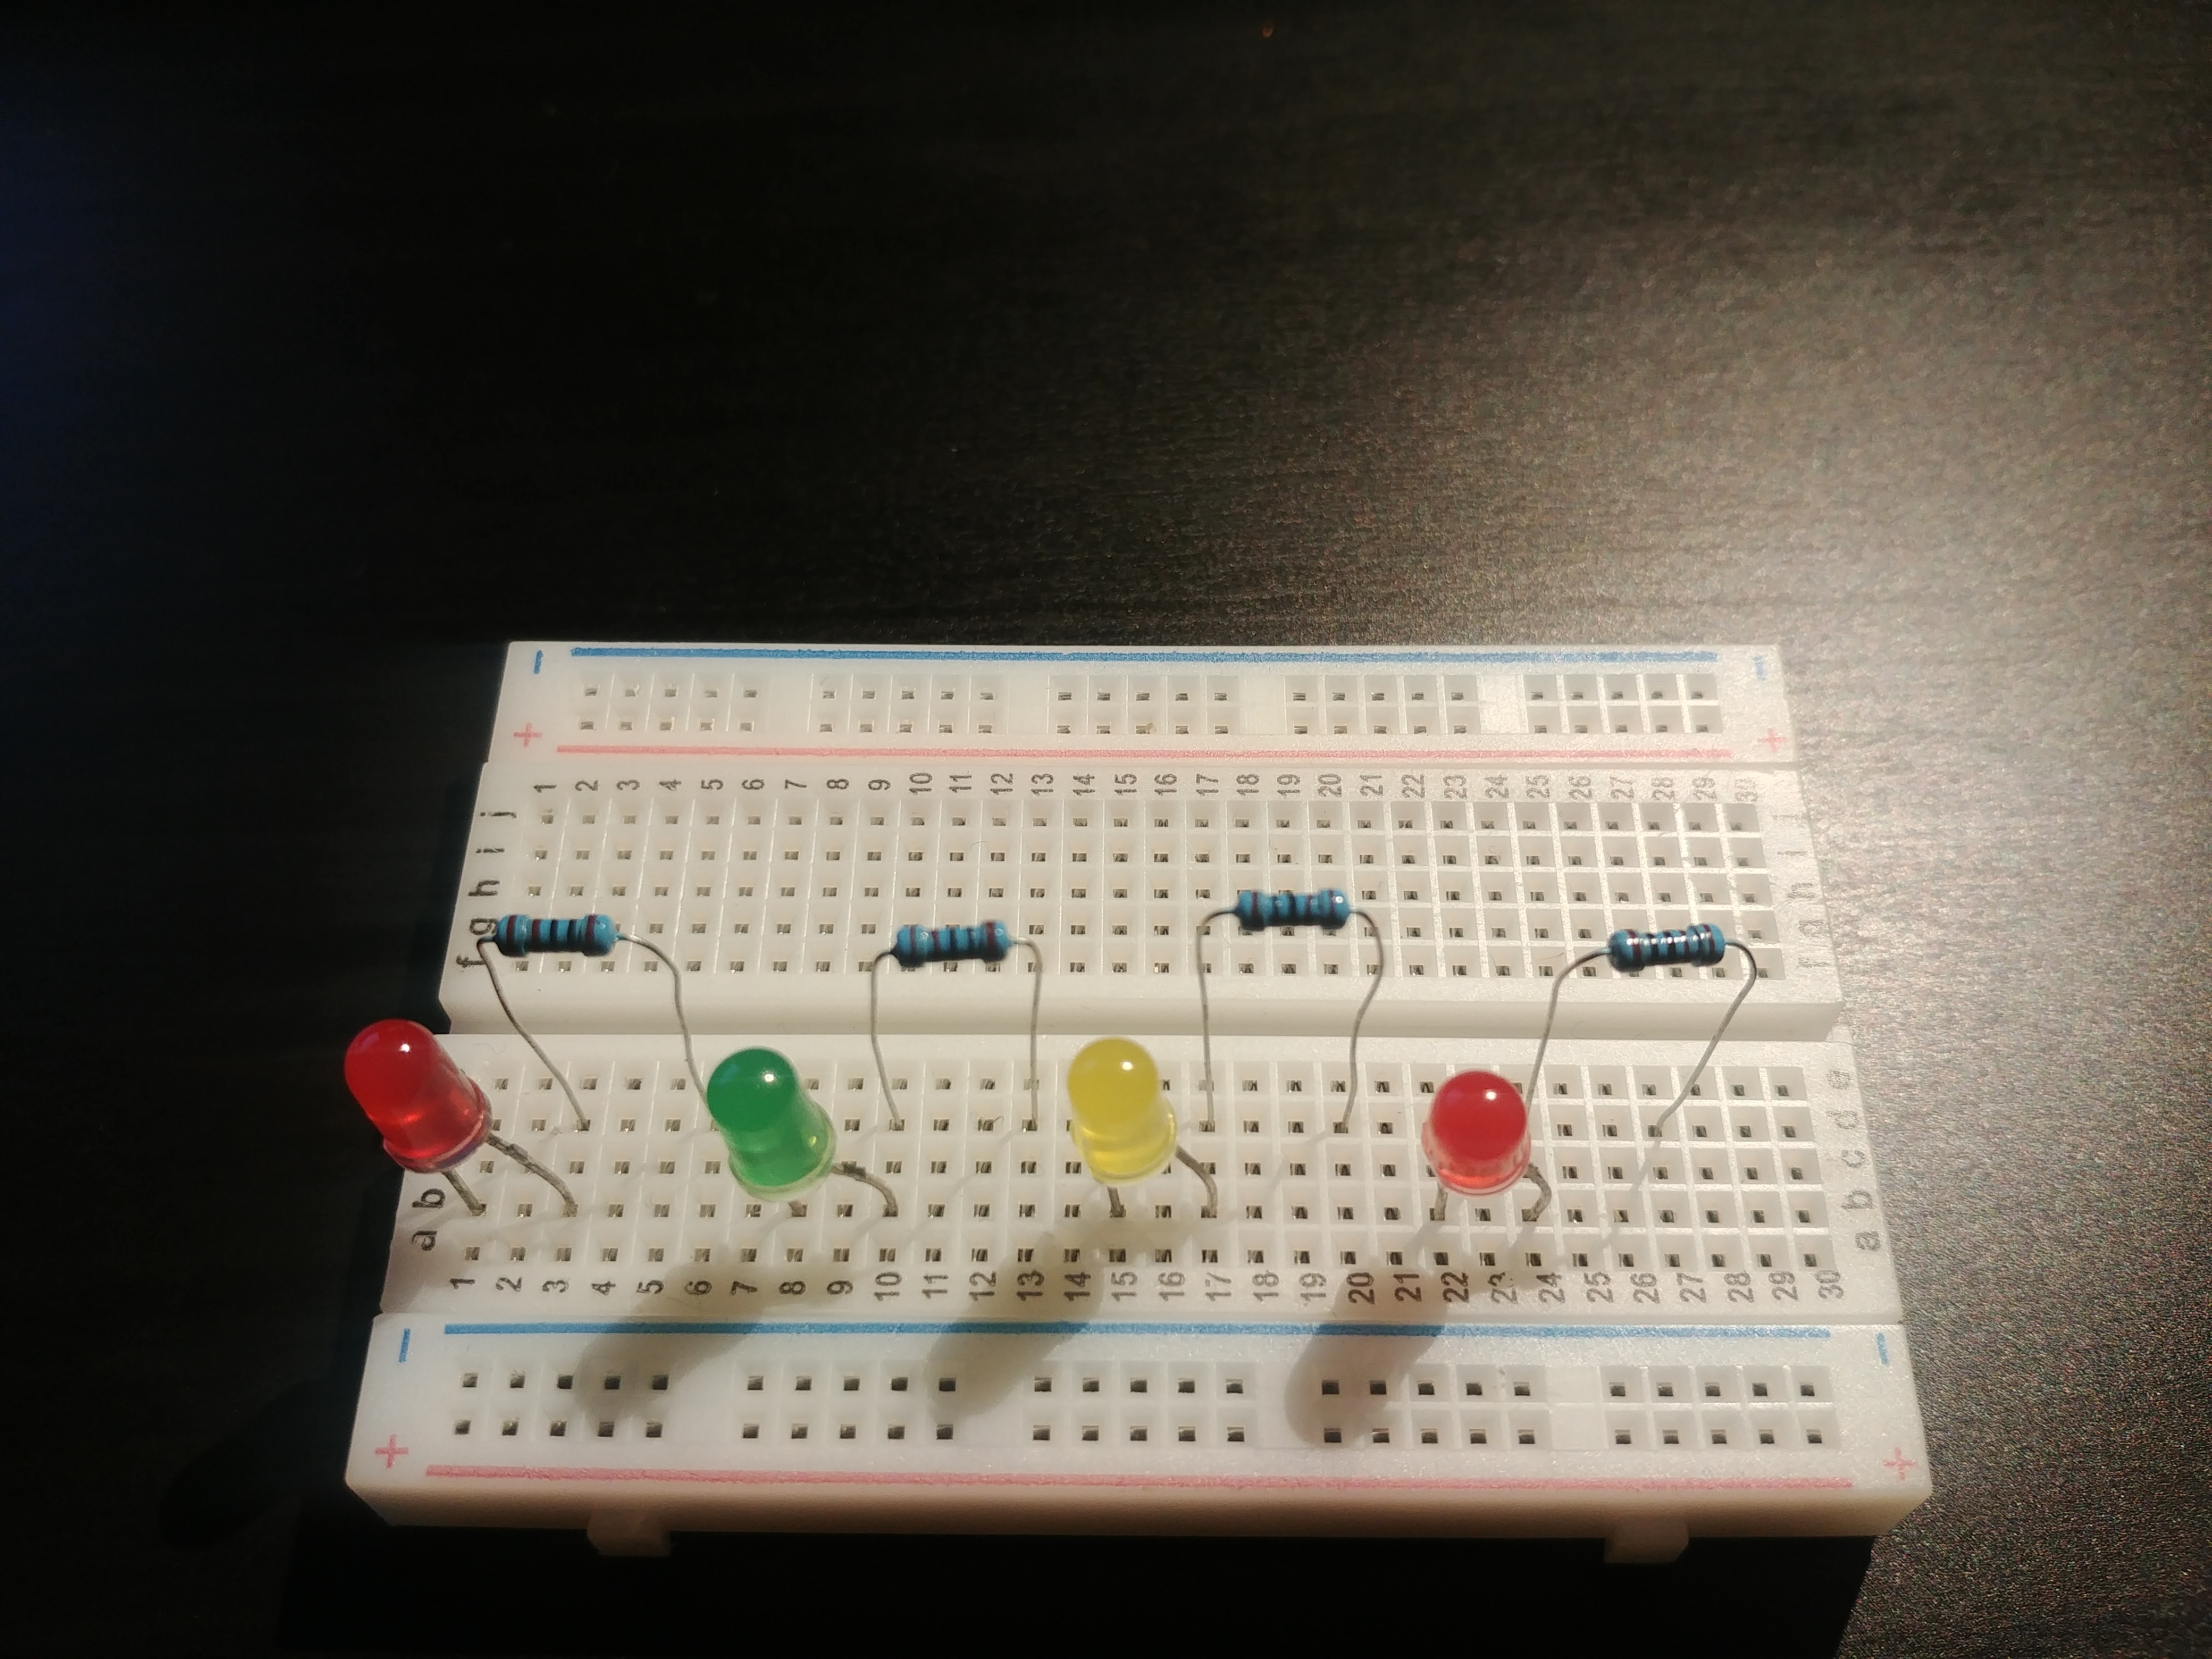 Actual LED’s on a breadboard